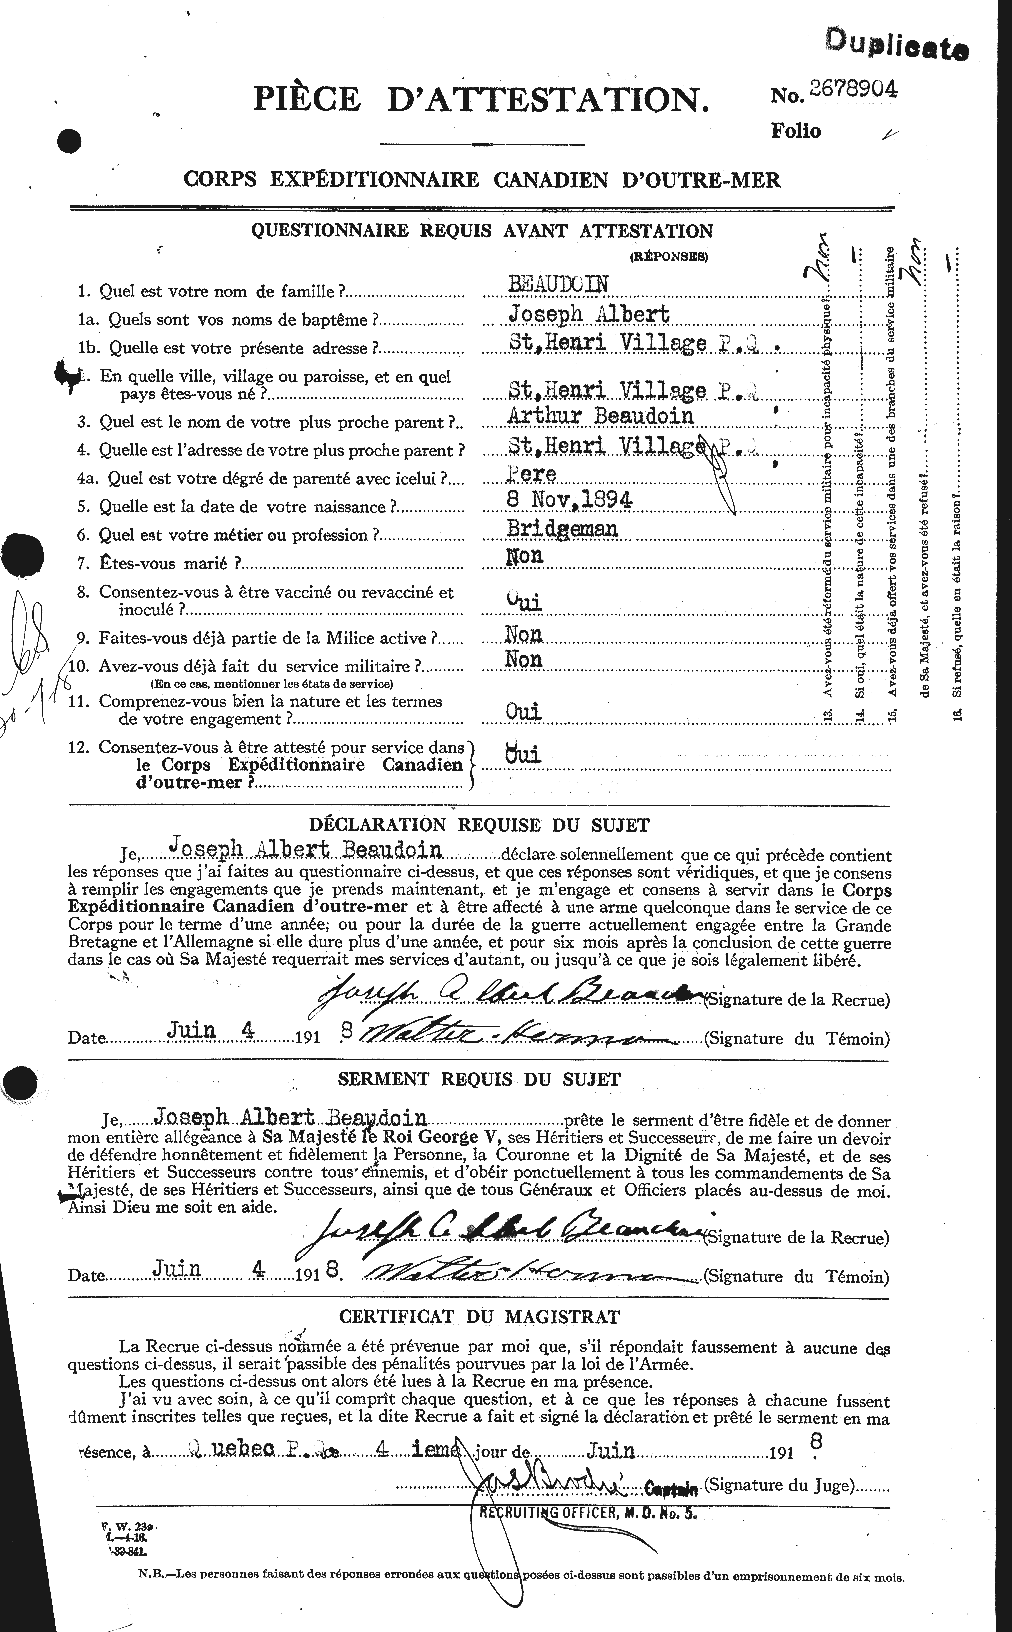 Personnel Records of the First World War - CEF 231255a